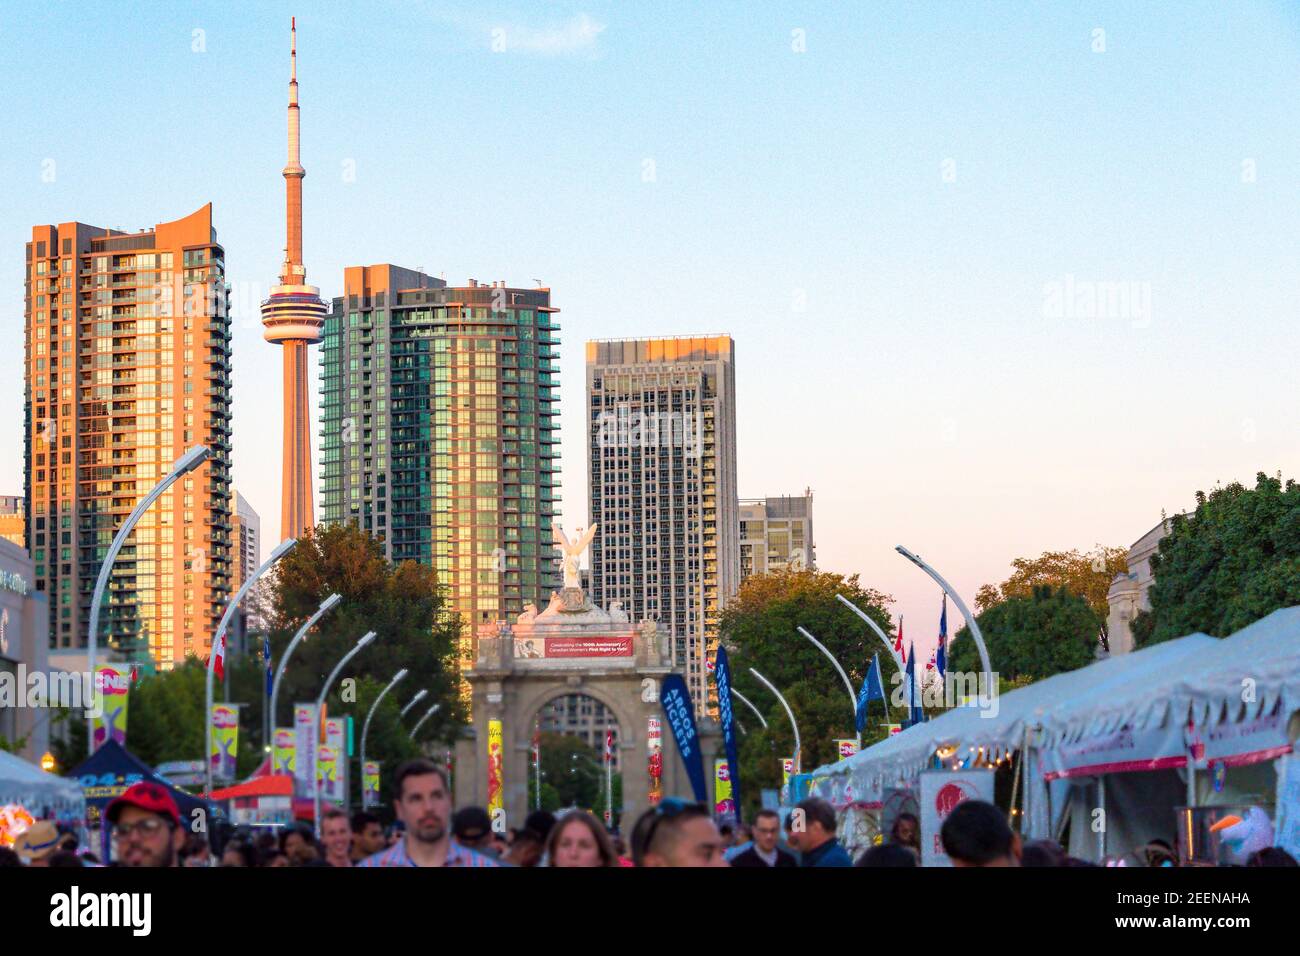 CNE or Canada National Exhibition: The CN Tower in a general view of the grounds full of visitors. Stock Photo